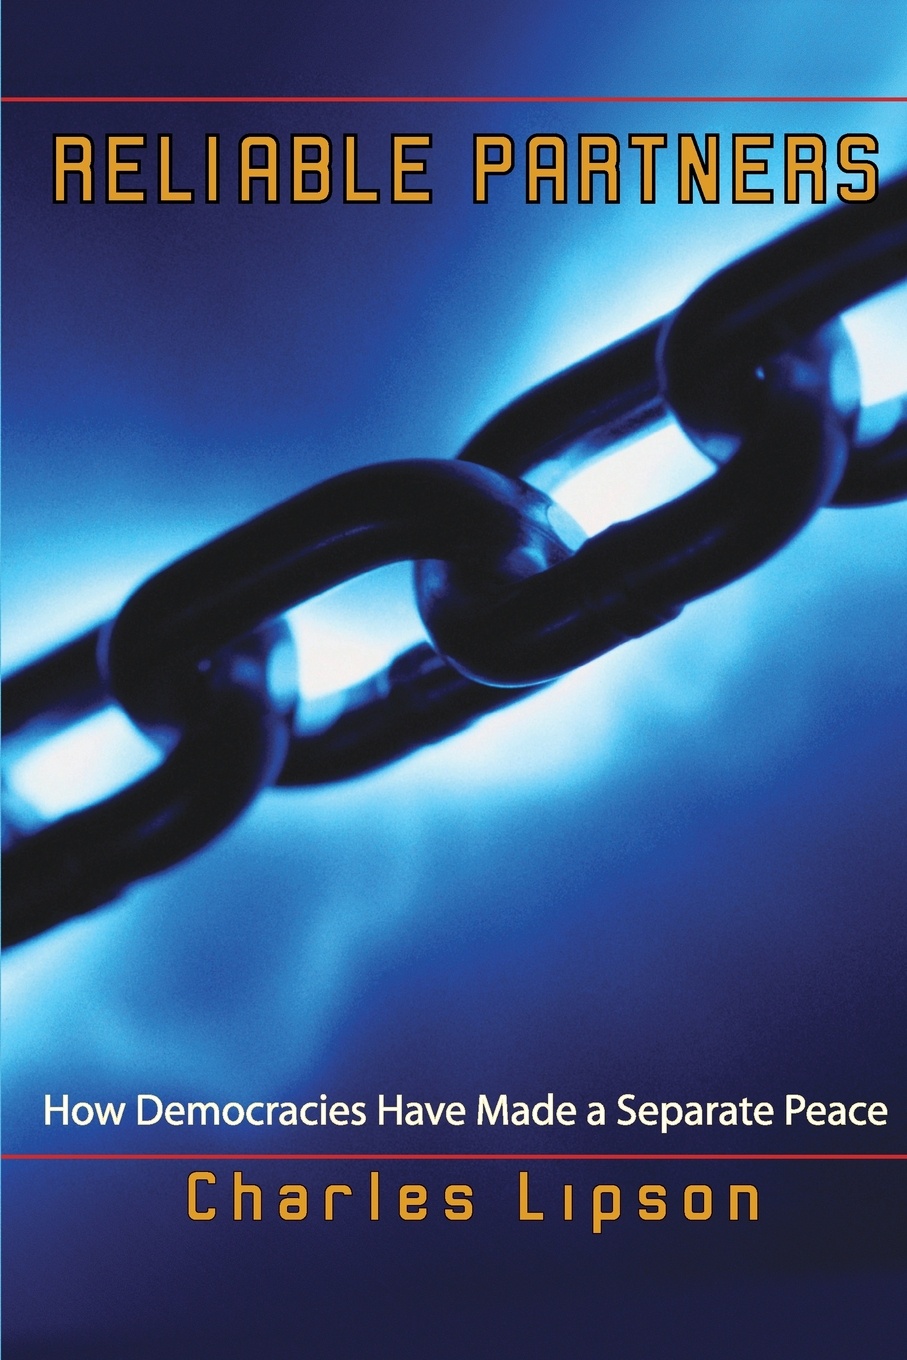 Reliable Partners. How Democracies Have Made a Separate Peace